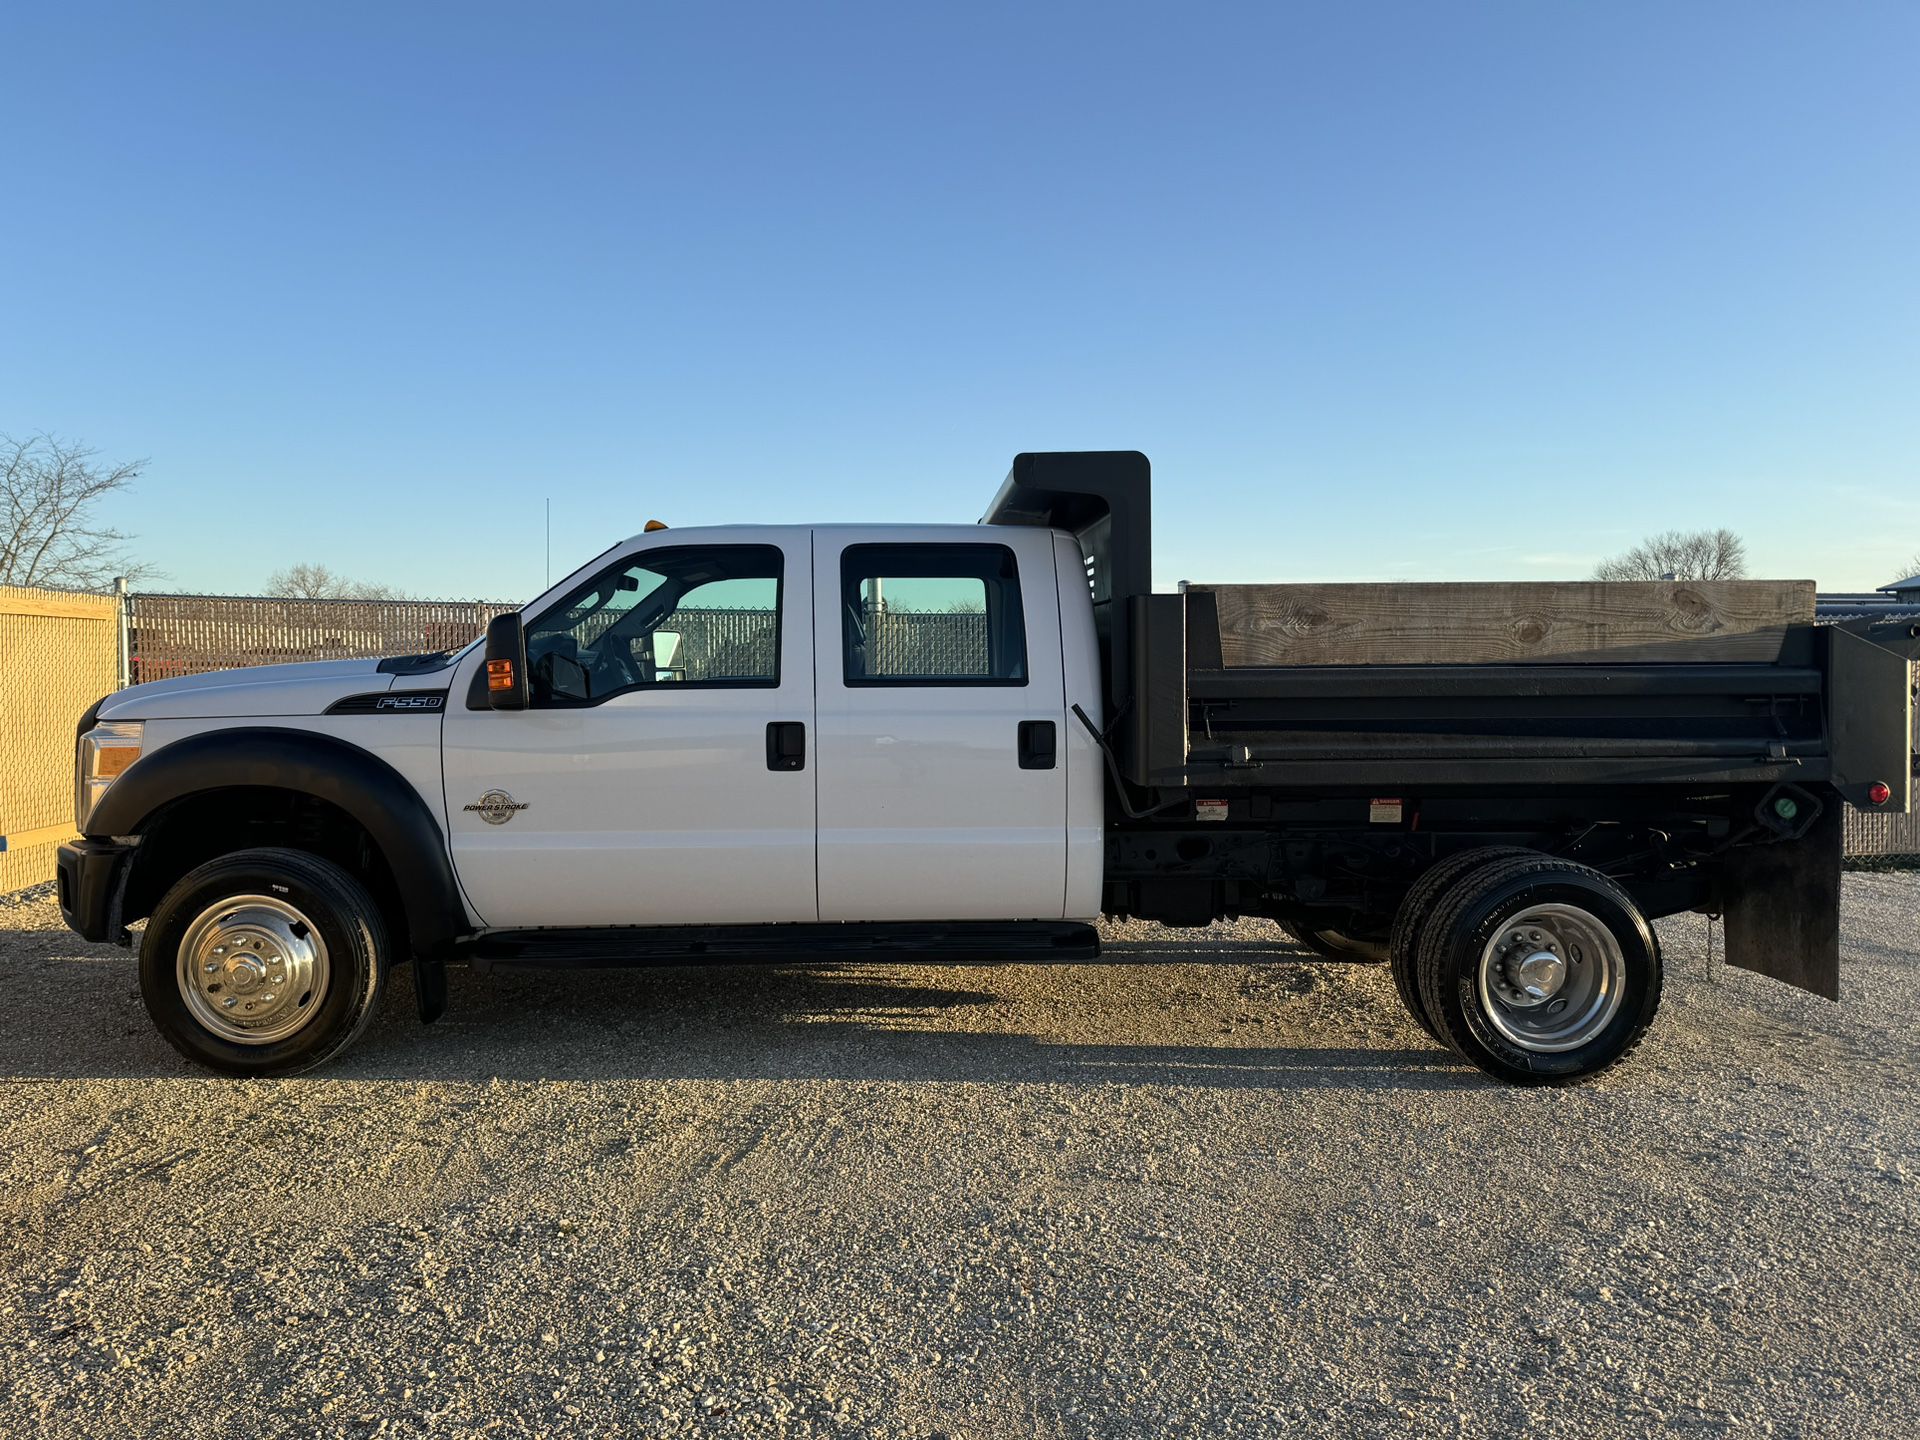 Selling A 2012 Ford F550 Crew Cab Dump Truck 6.7l Power stroke Diesel Low Miles Pickups Trucks Trailers Western Scag Wright Stander Mowers Cars Chevy 